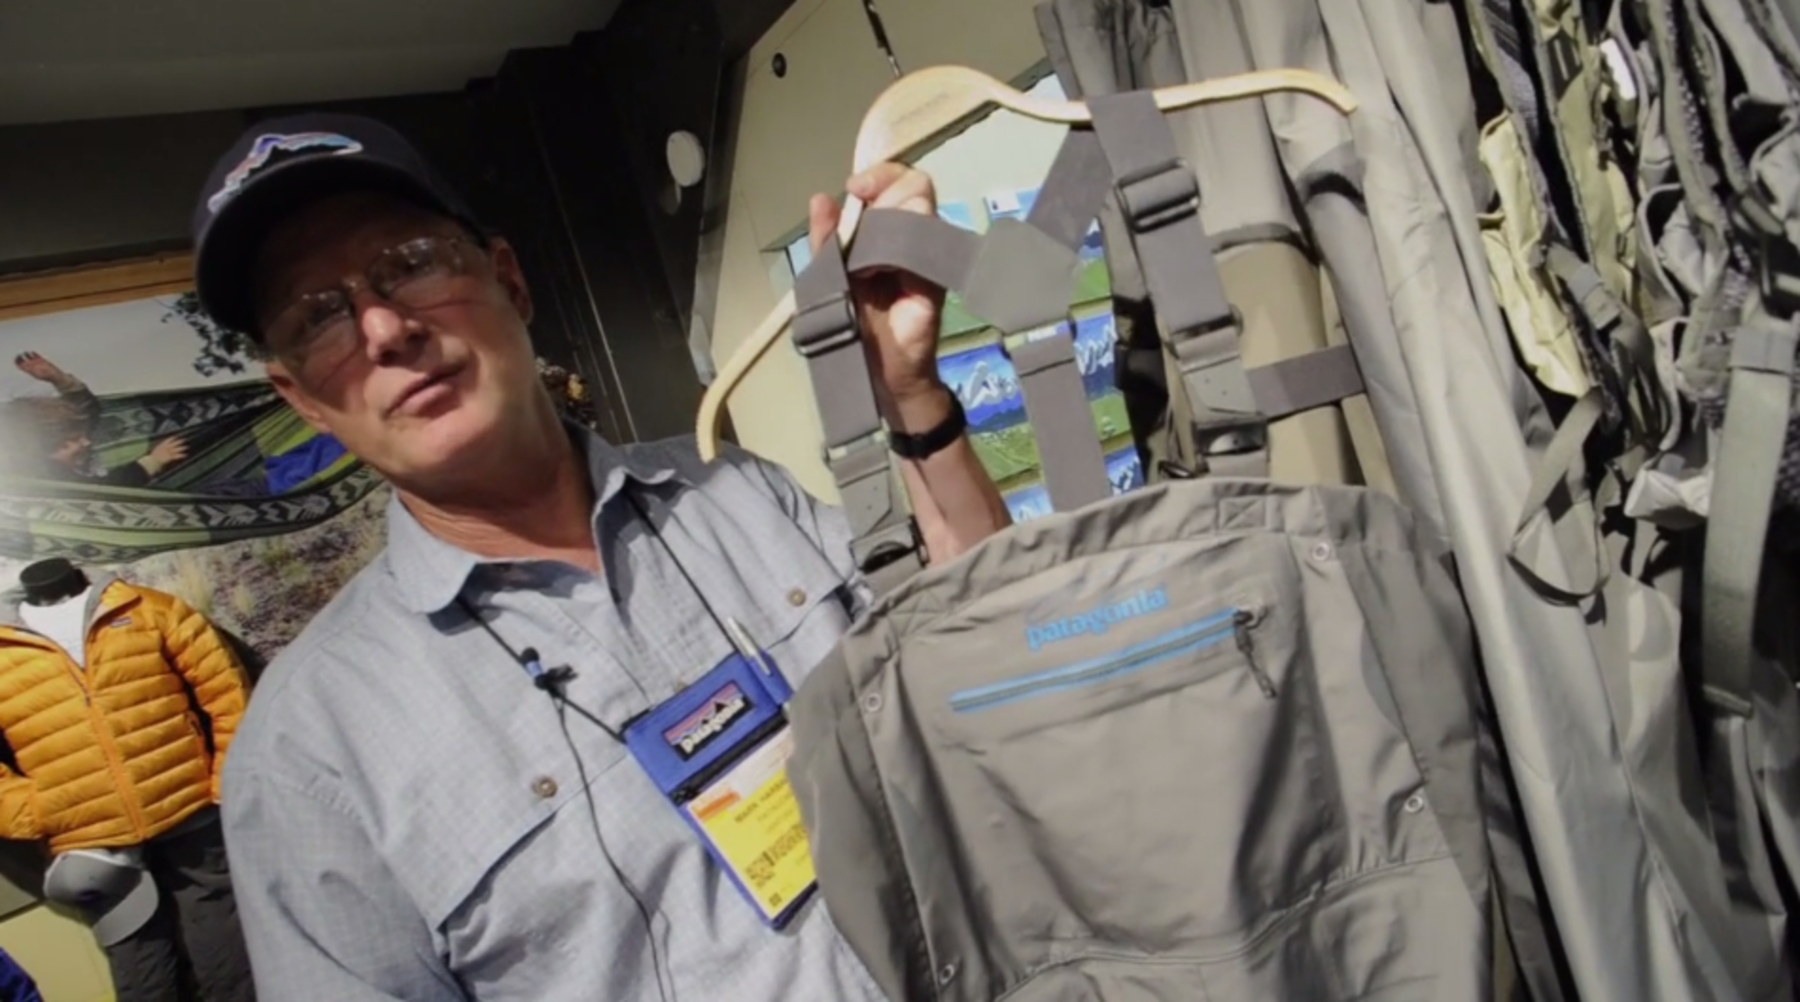 New Women's Waders From Patagonia: Video - Fly Fishing